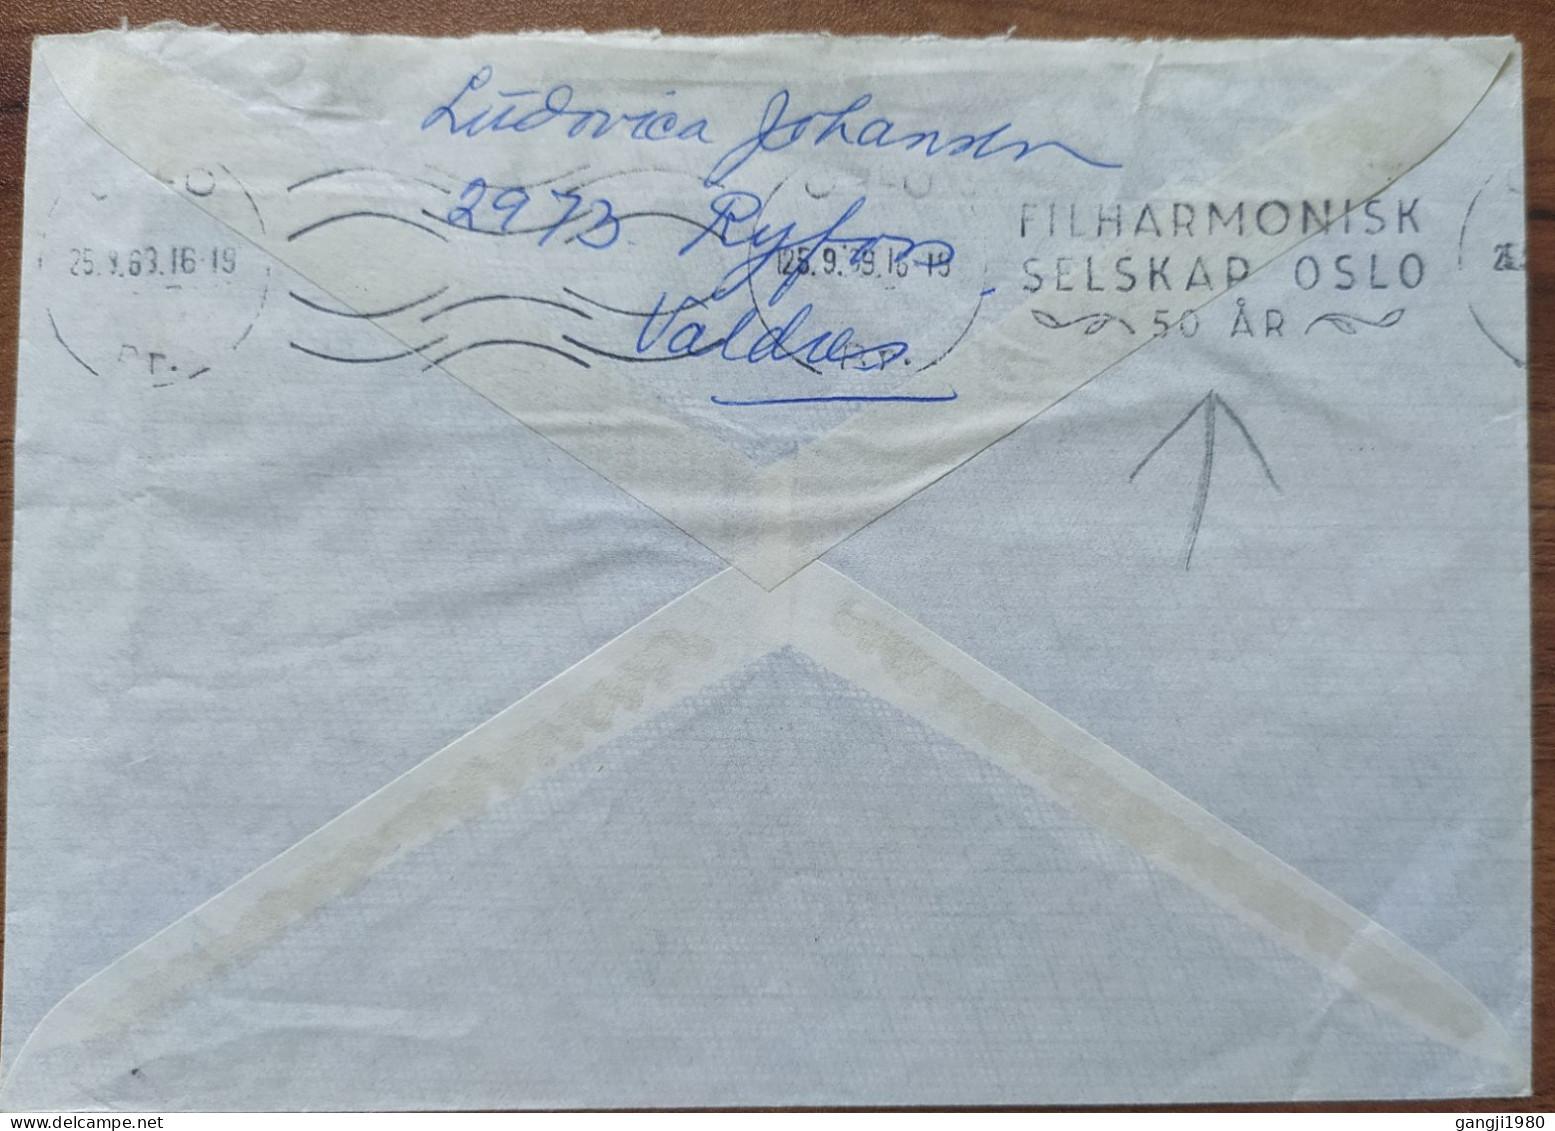 NORWAY 1969, COVER USED, M/S SAGAFJORD, NEW YORK - OSLO, POSTED ON BOARD, FLAG PICTURE, SLOGAN PHILHARMONIC SOCIETY, FIL - Other & Unclassified